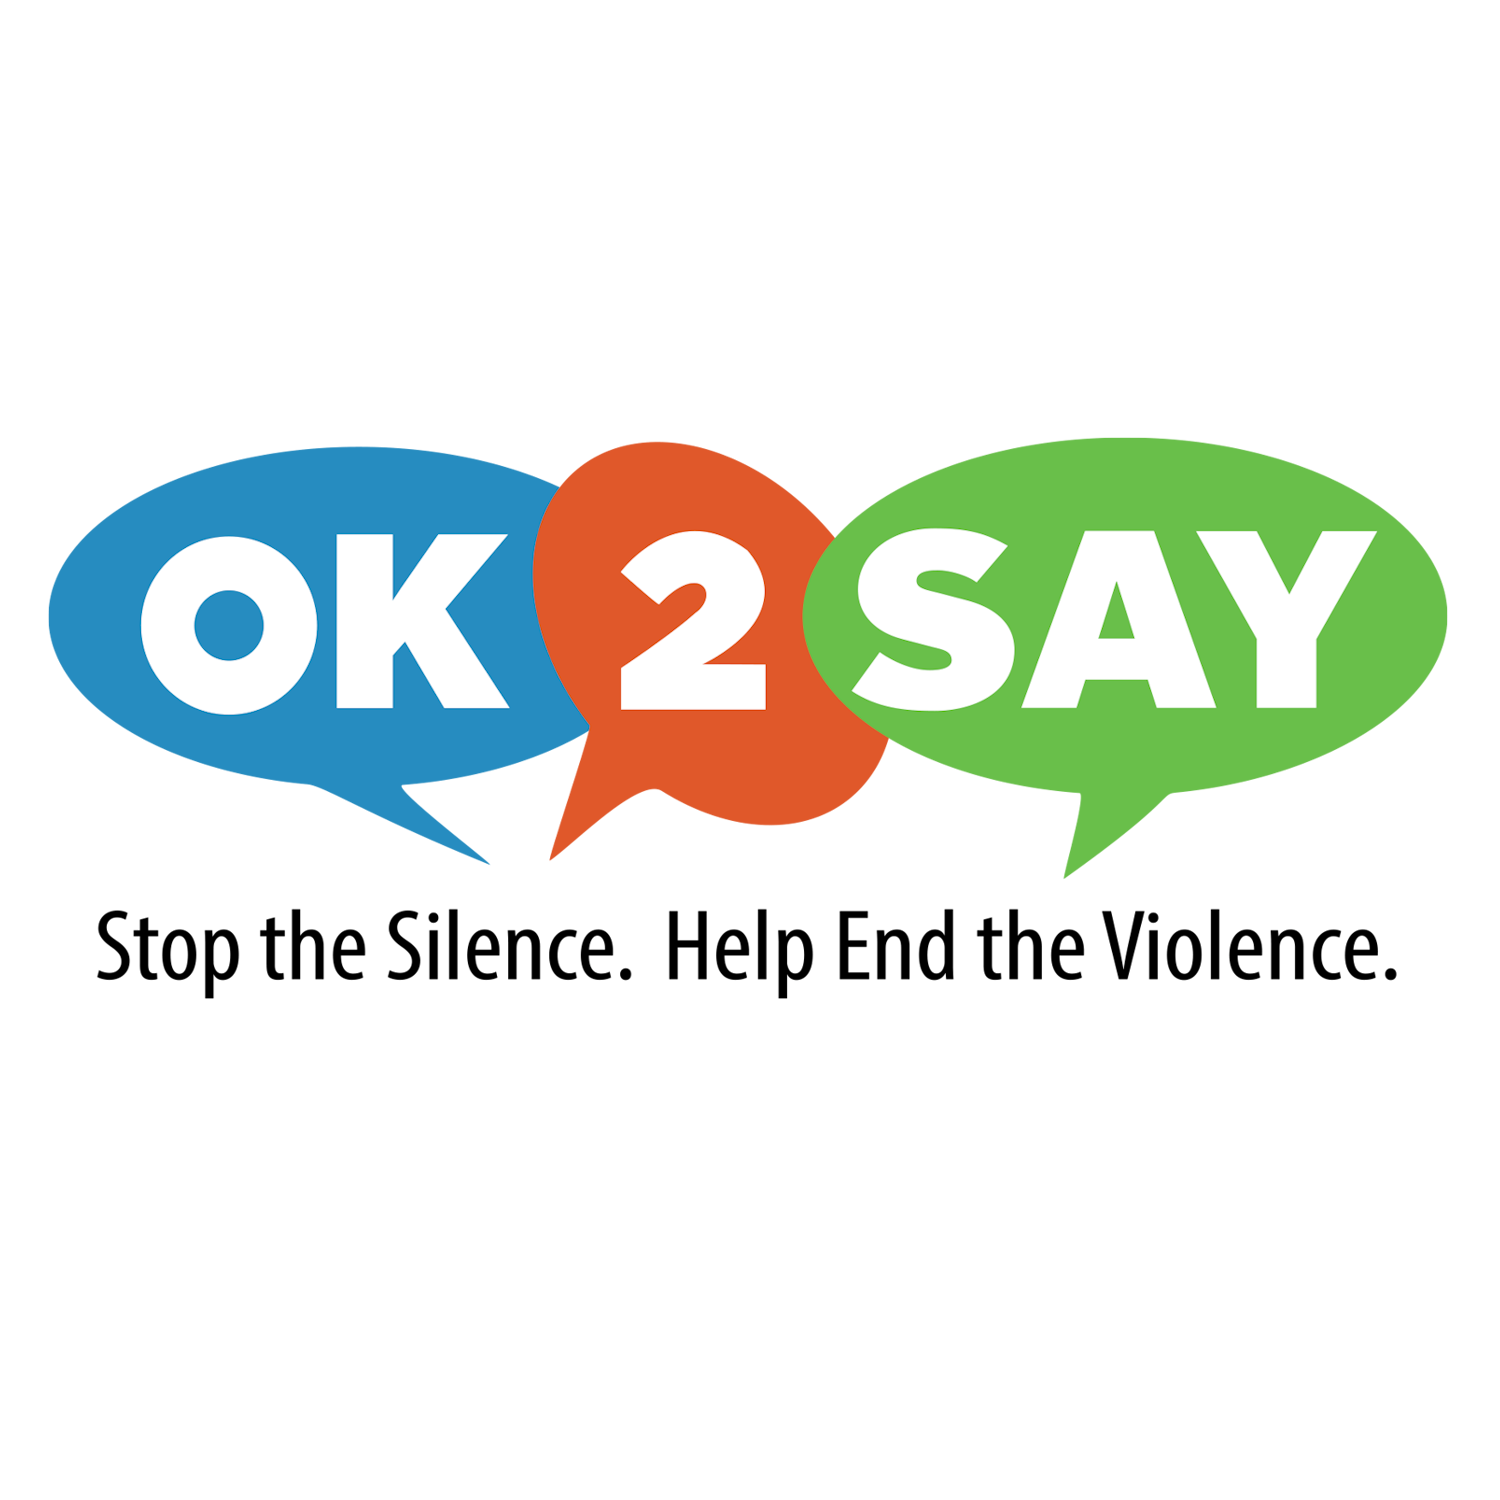 ok 2 say stope the silence. help end the violence